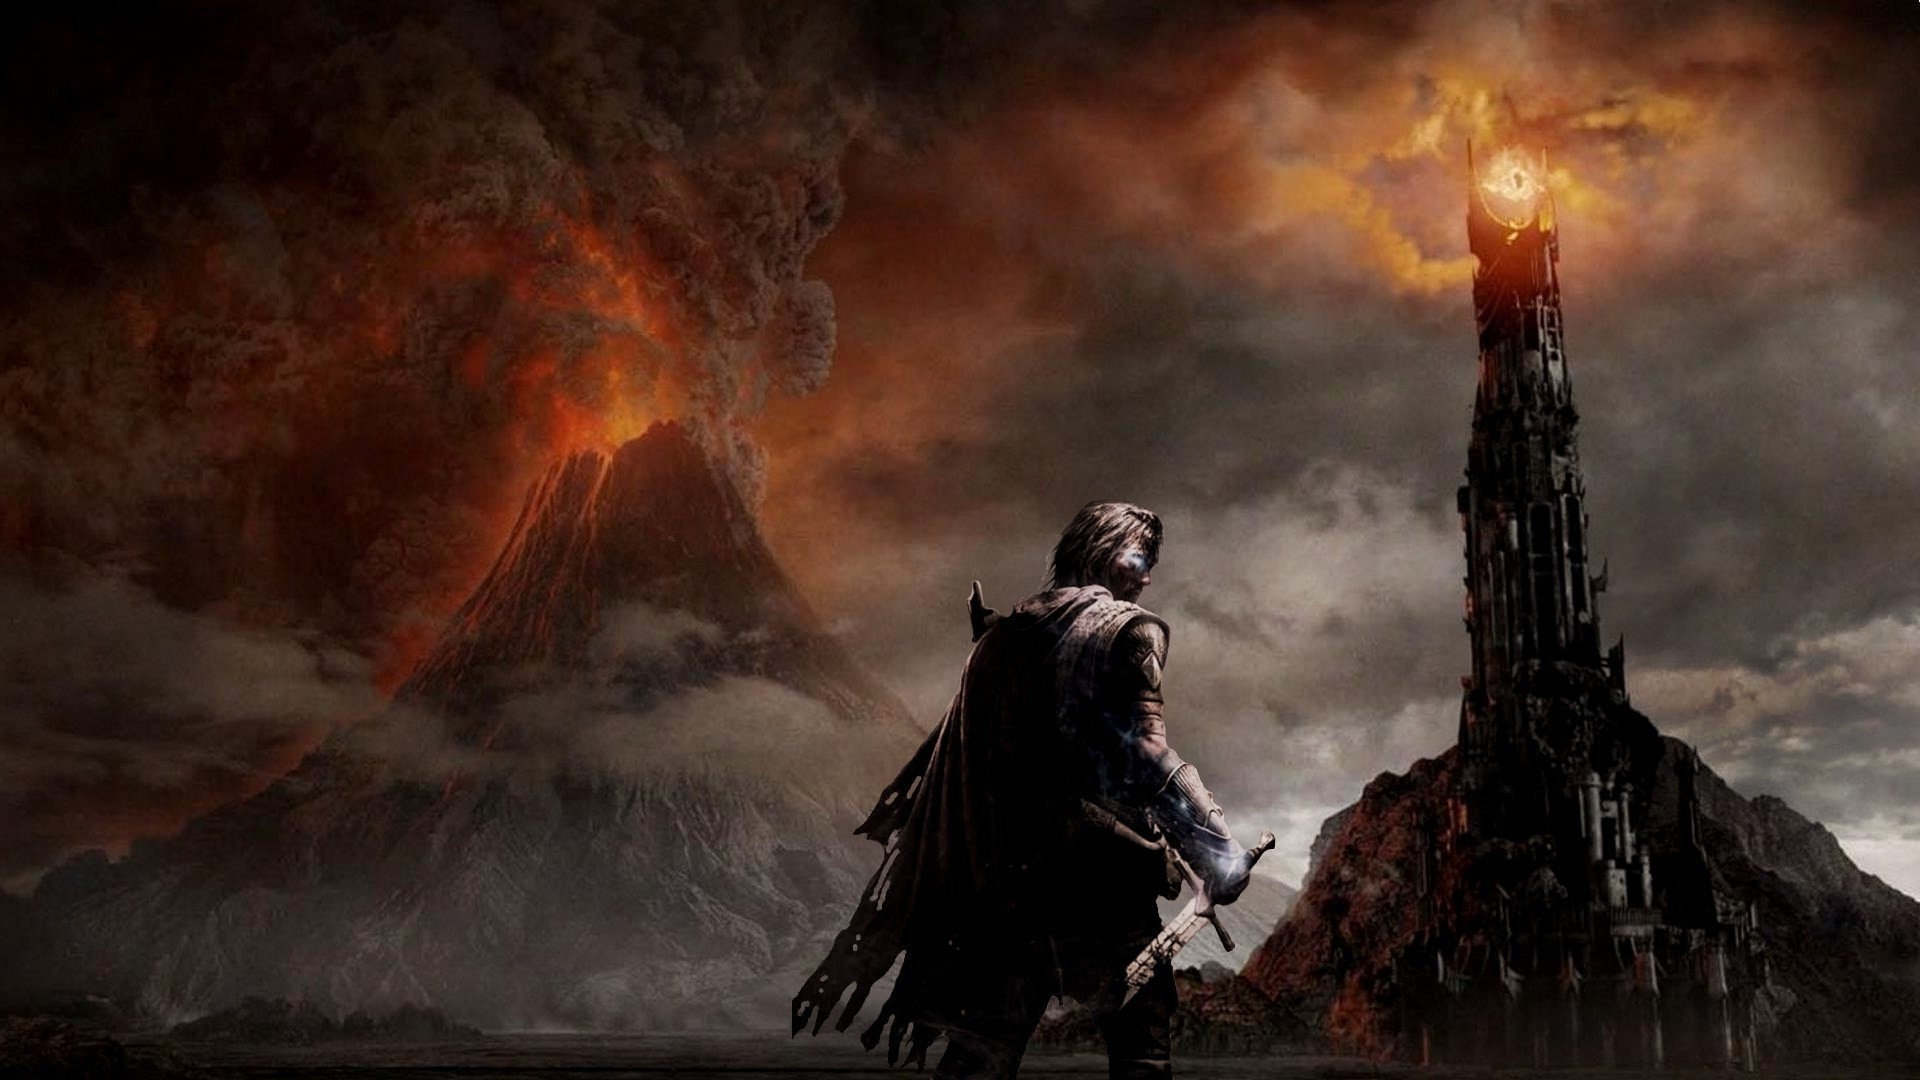 Lord of the rings wallpaper hd pack 48 kb by auden